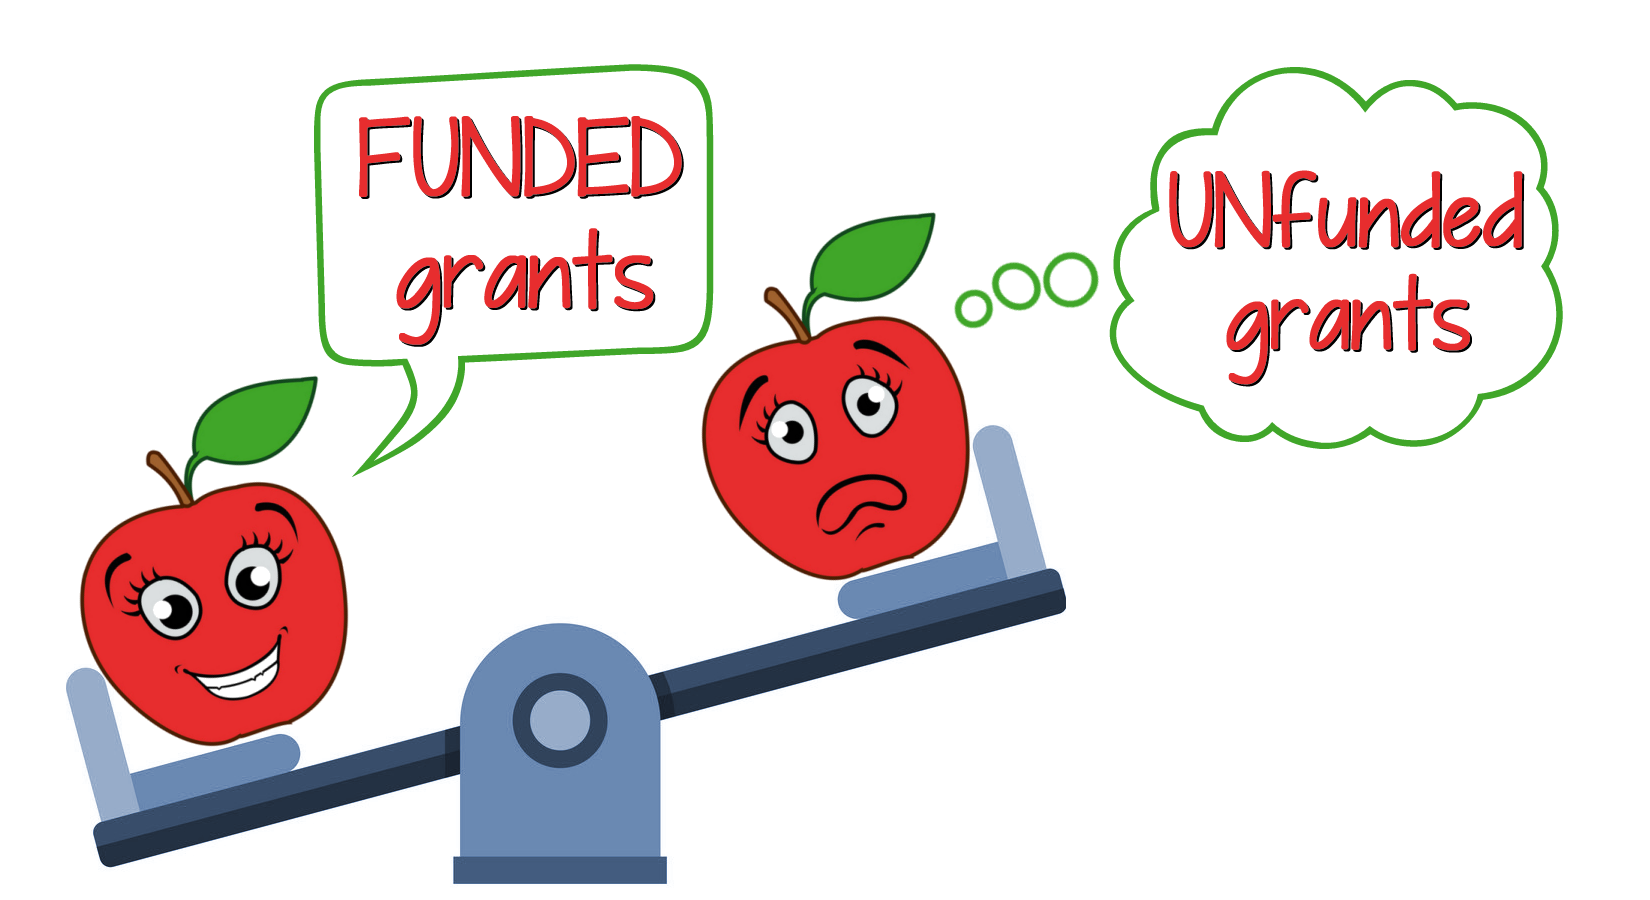 Happy Funded Apple and Sad UNfunded Apple